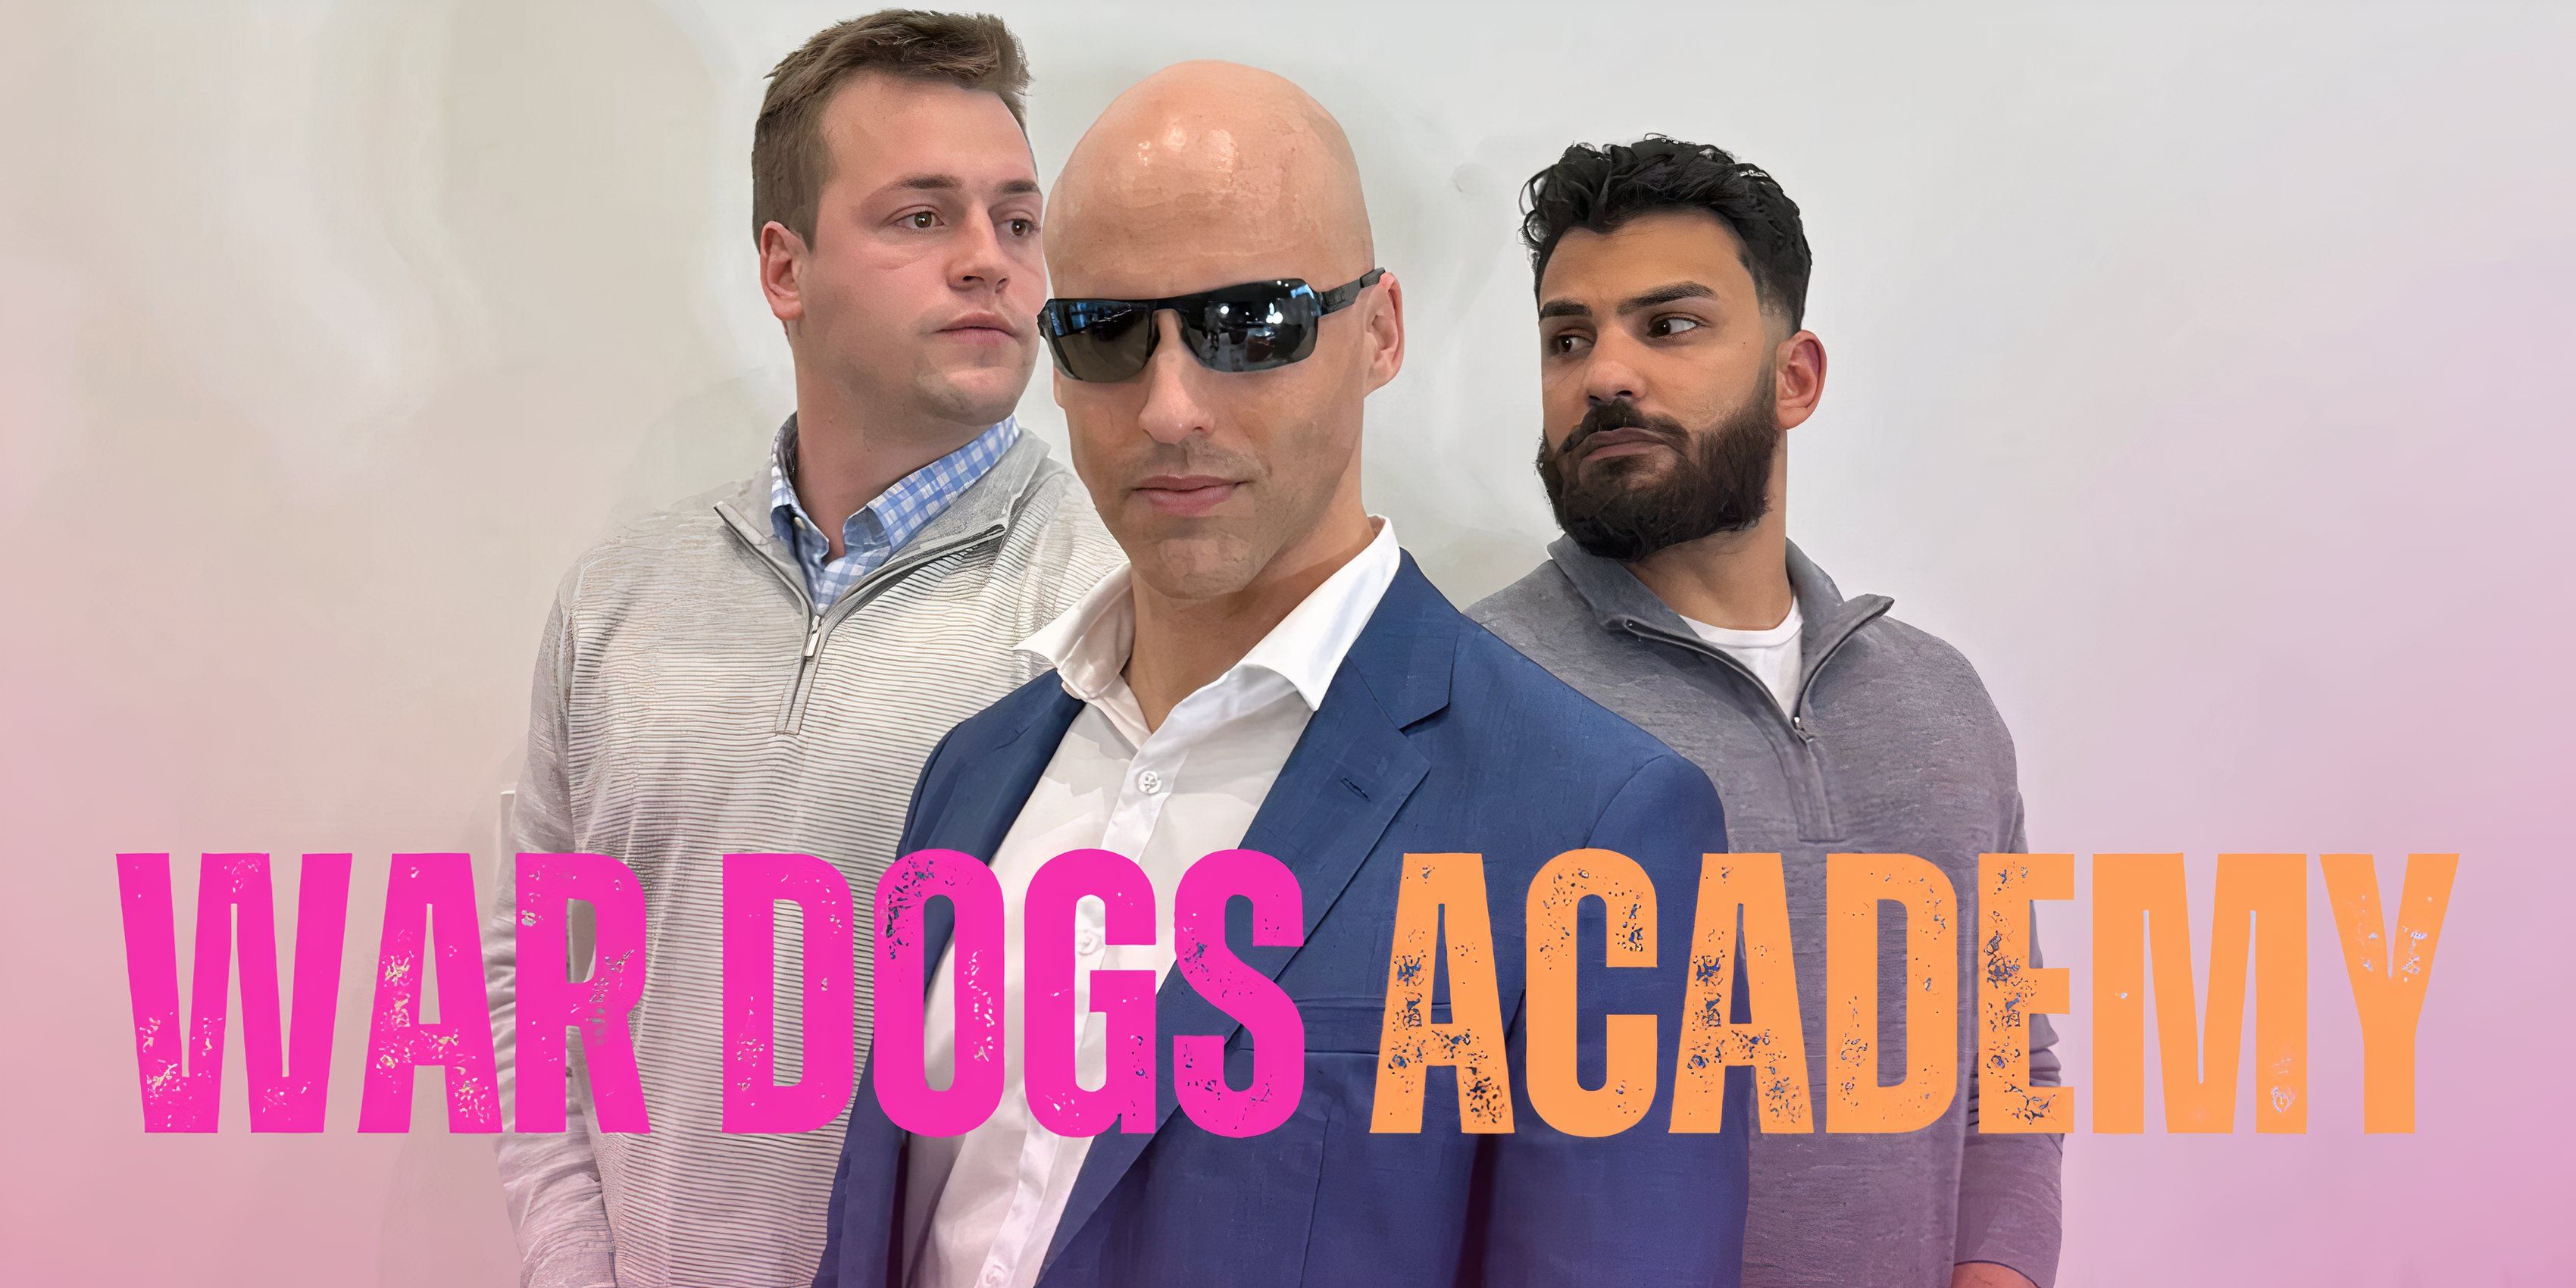 David Packouz and his co-founders in a War Dogs Academy advertisement